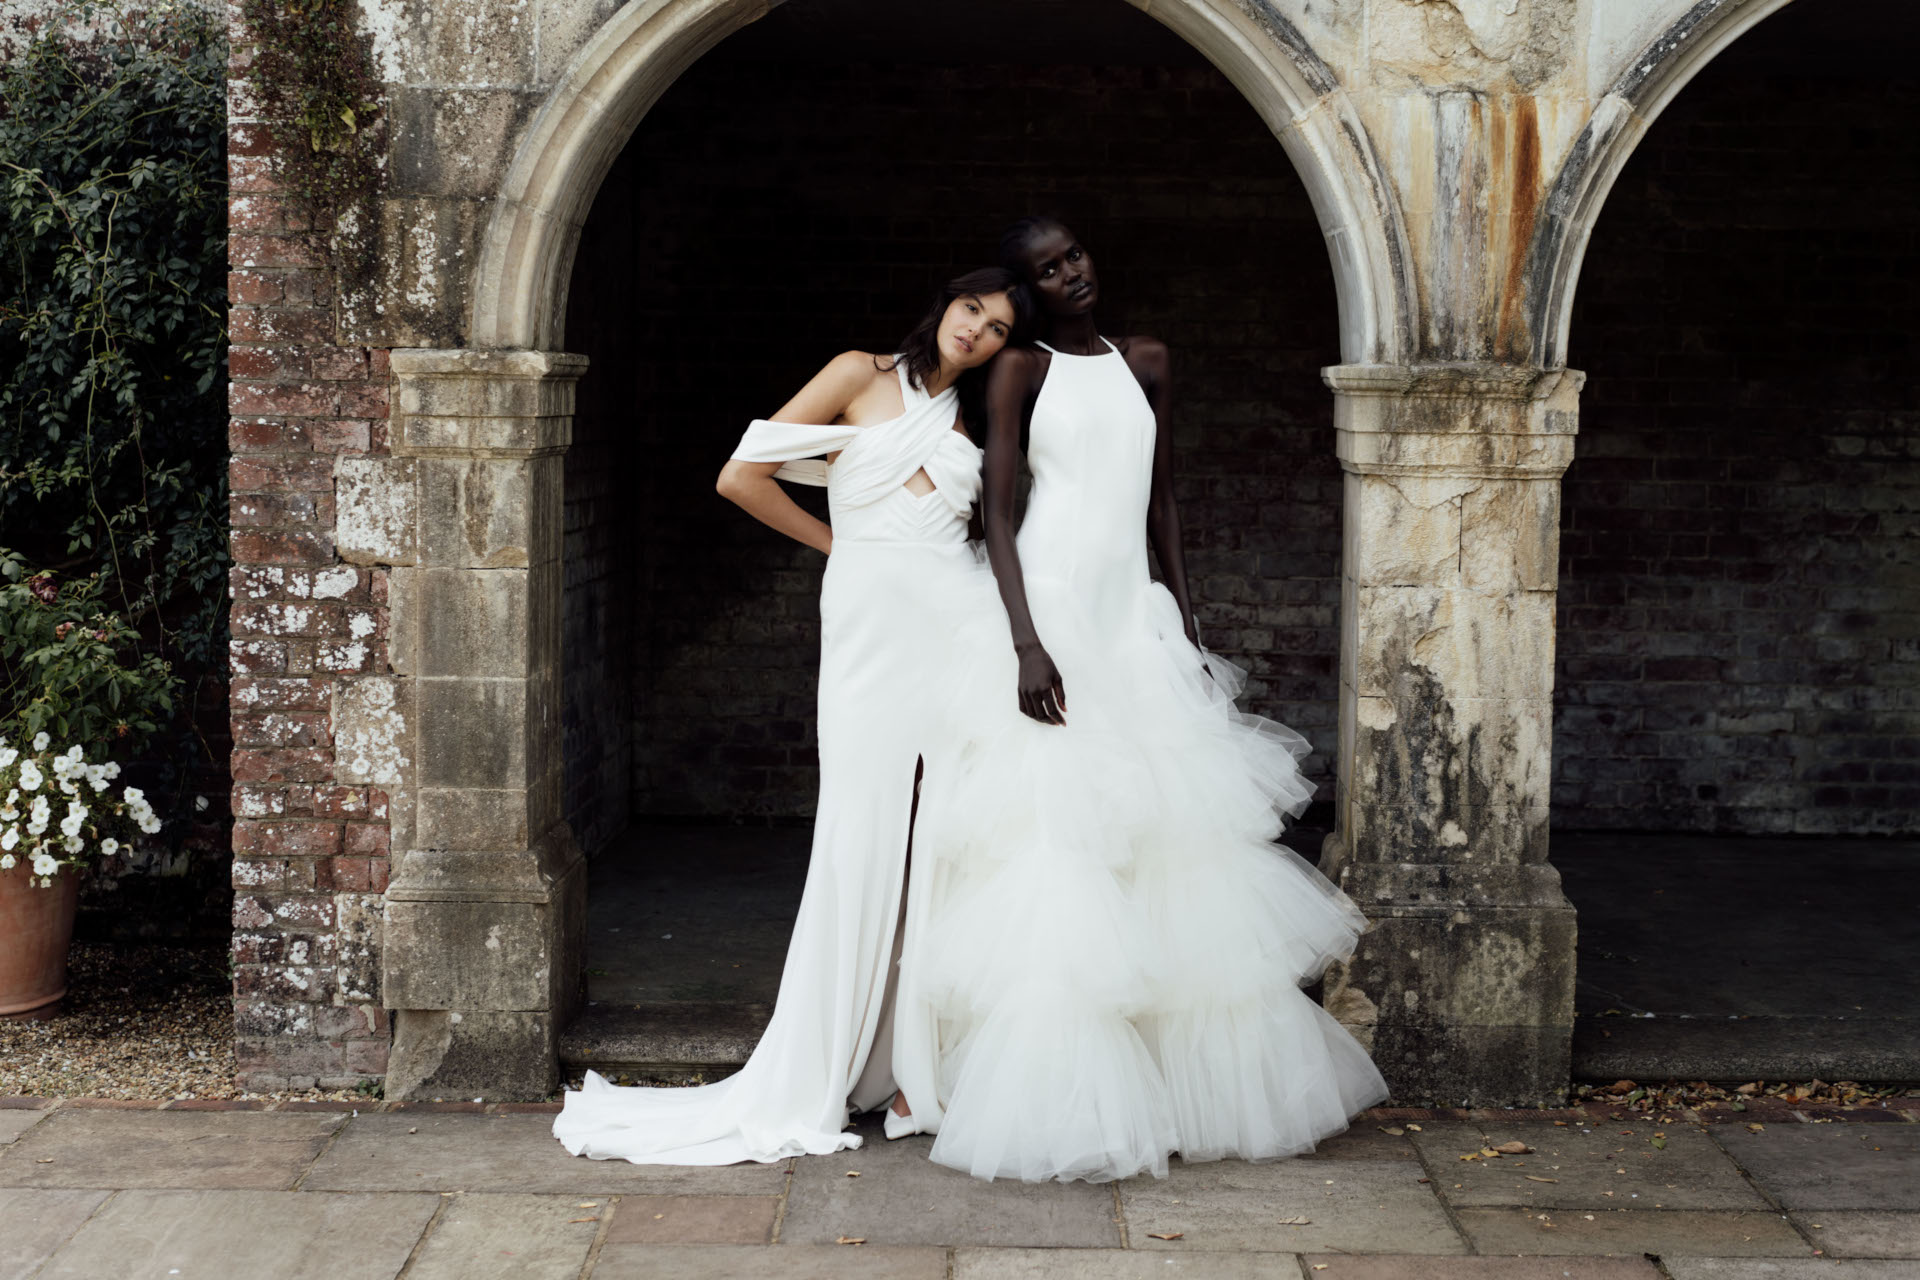 Two models in white dress stood in stone arch